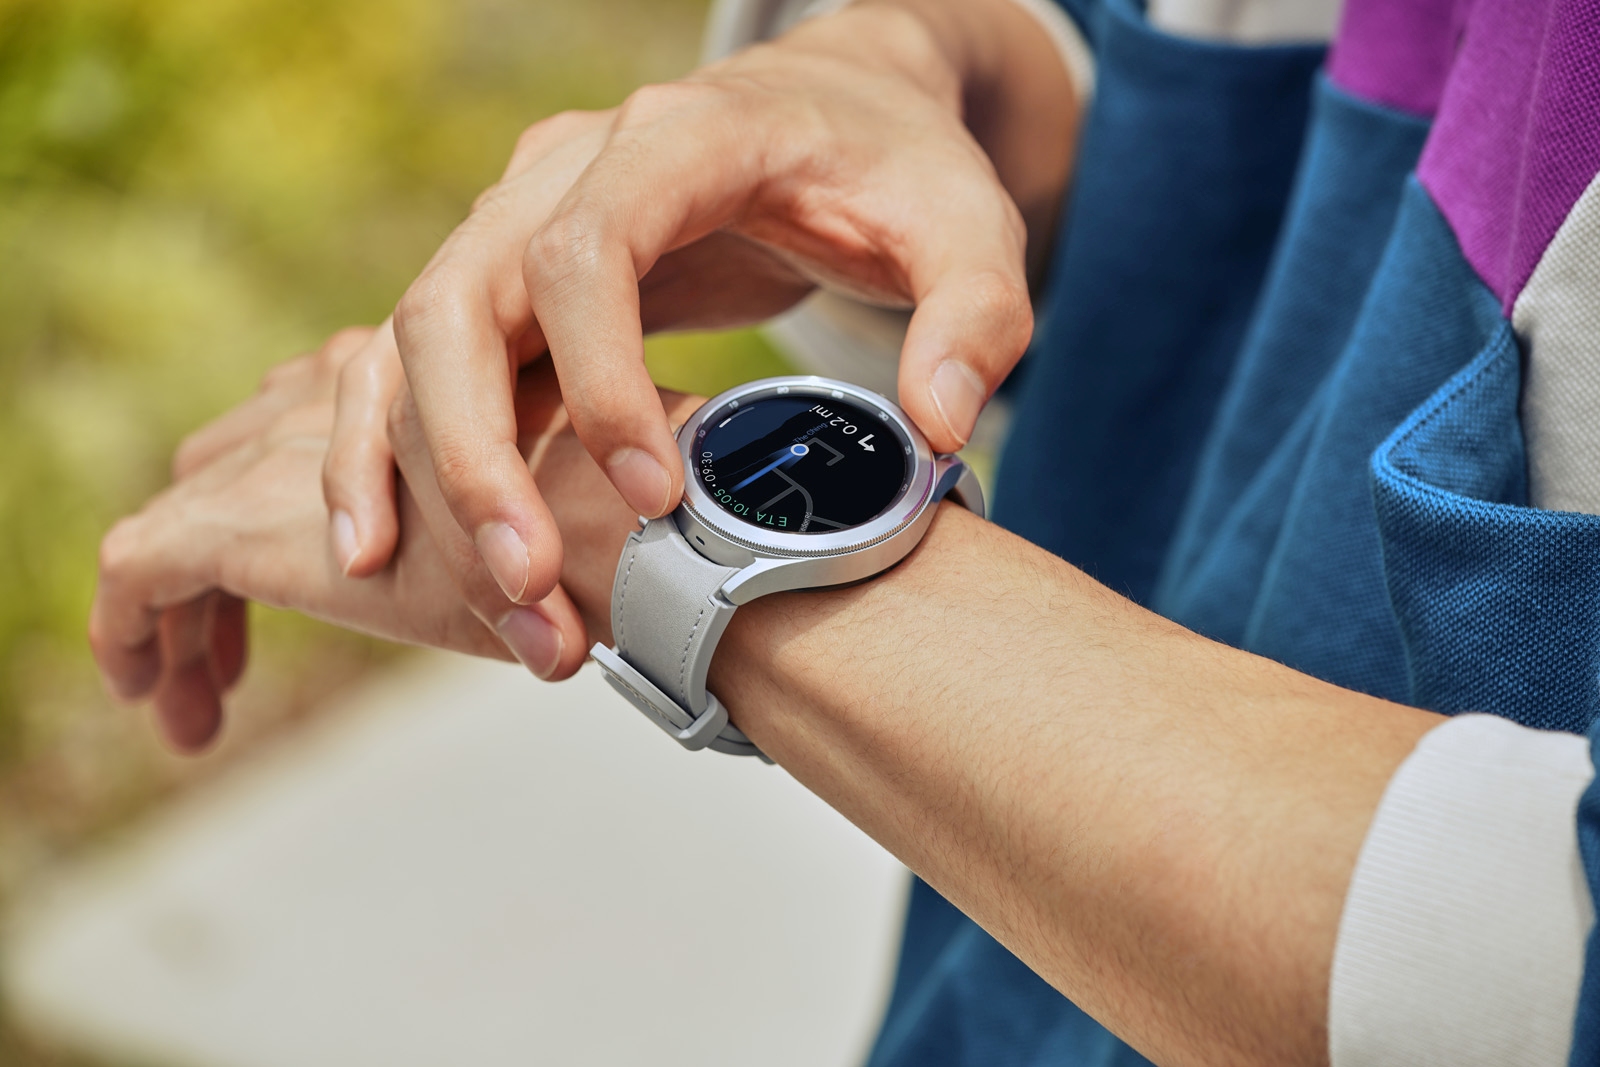 Samsung Galaxy Watch 4 Malaysia pre-order: All you need to know